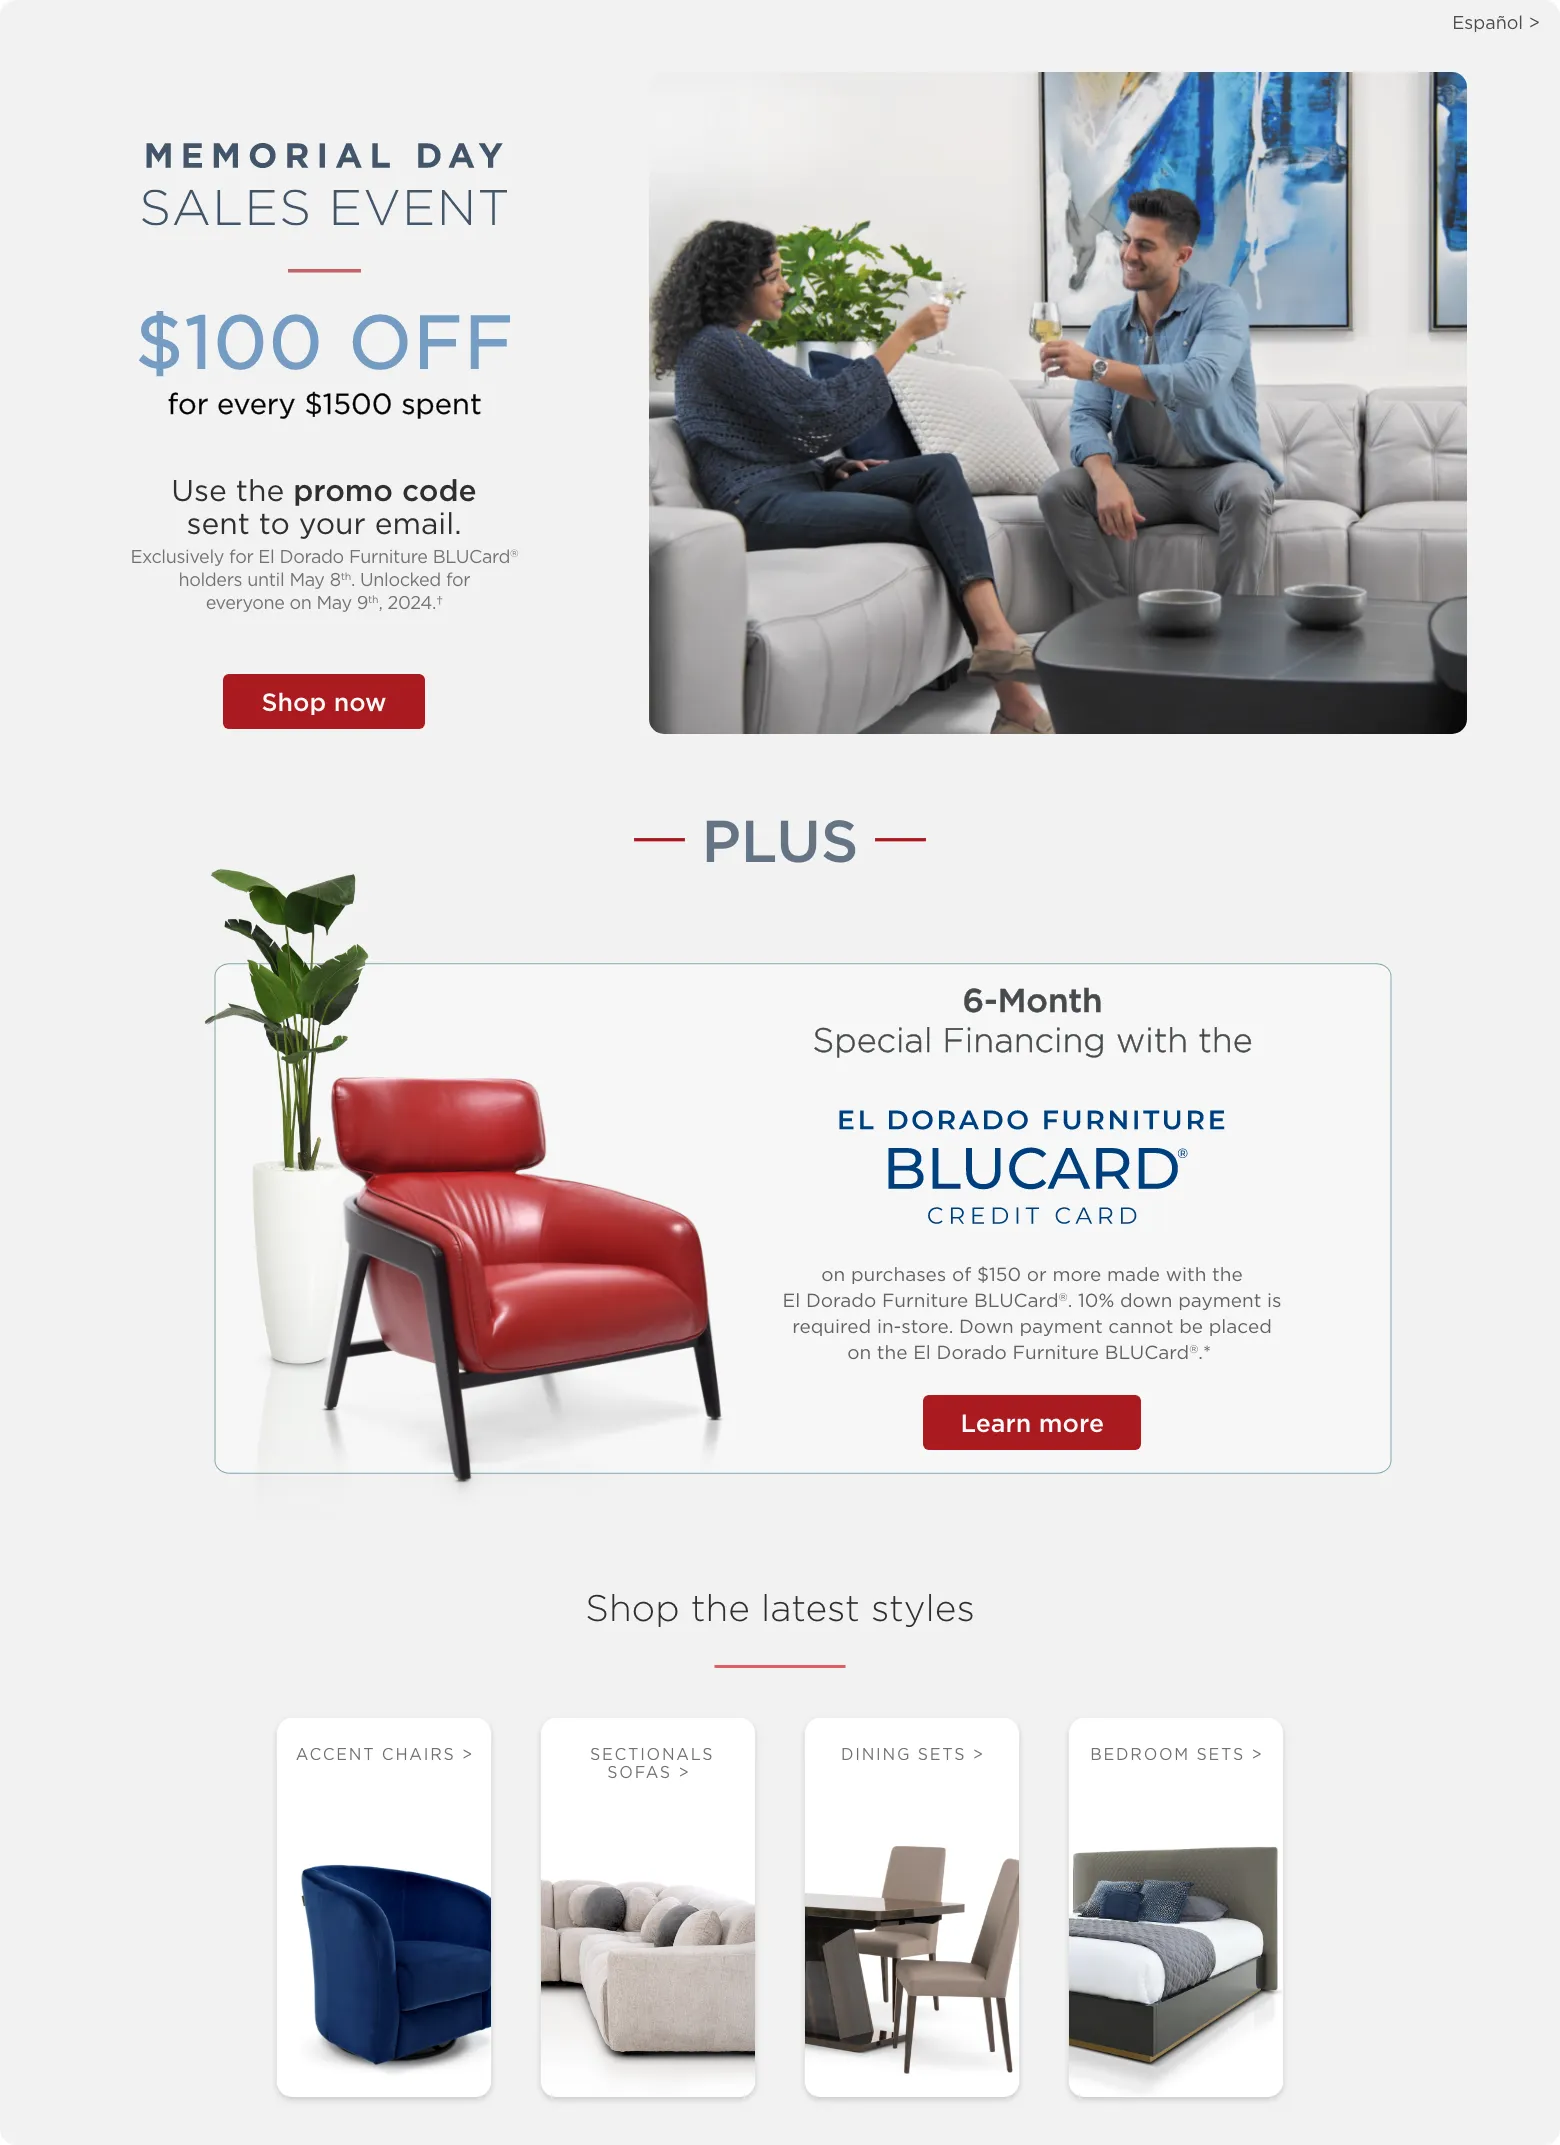 Memorial Day Sales Event. $100 off for every $1500 spent. Use the promo code sent to your email. Exclusively for El Dorado Furniture BLUCard® holders until May 8th. Unlocked for everyone on May 9th, 2024.† Shop now. Plus 6-Month Special Financing with the El Dorado Furniture blucard credit card on purchases of $150 or more made with the El Dorado Furniture BLUCard®. 10% down payment is
required in-store. Down payment cannot be placed on the El Dorado Furniture BLUCard®.*  learn more. shop the latest styles. accent chairs. leather sofas. dining sets. bedroom sets.